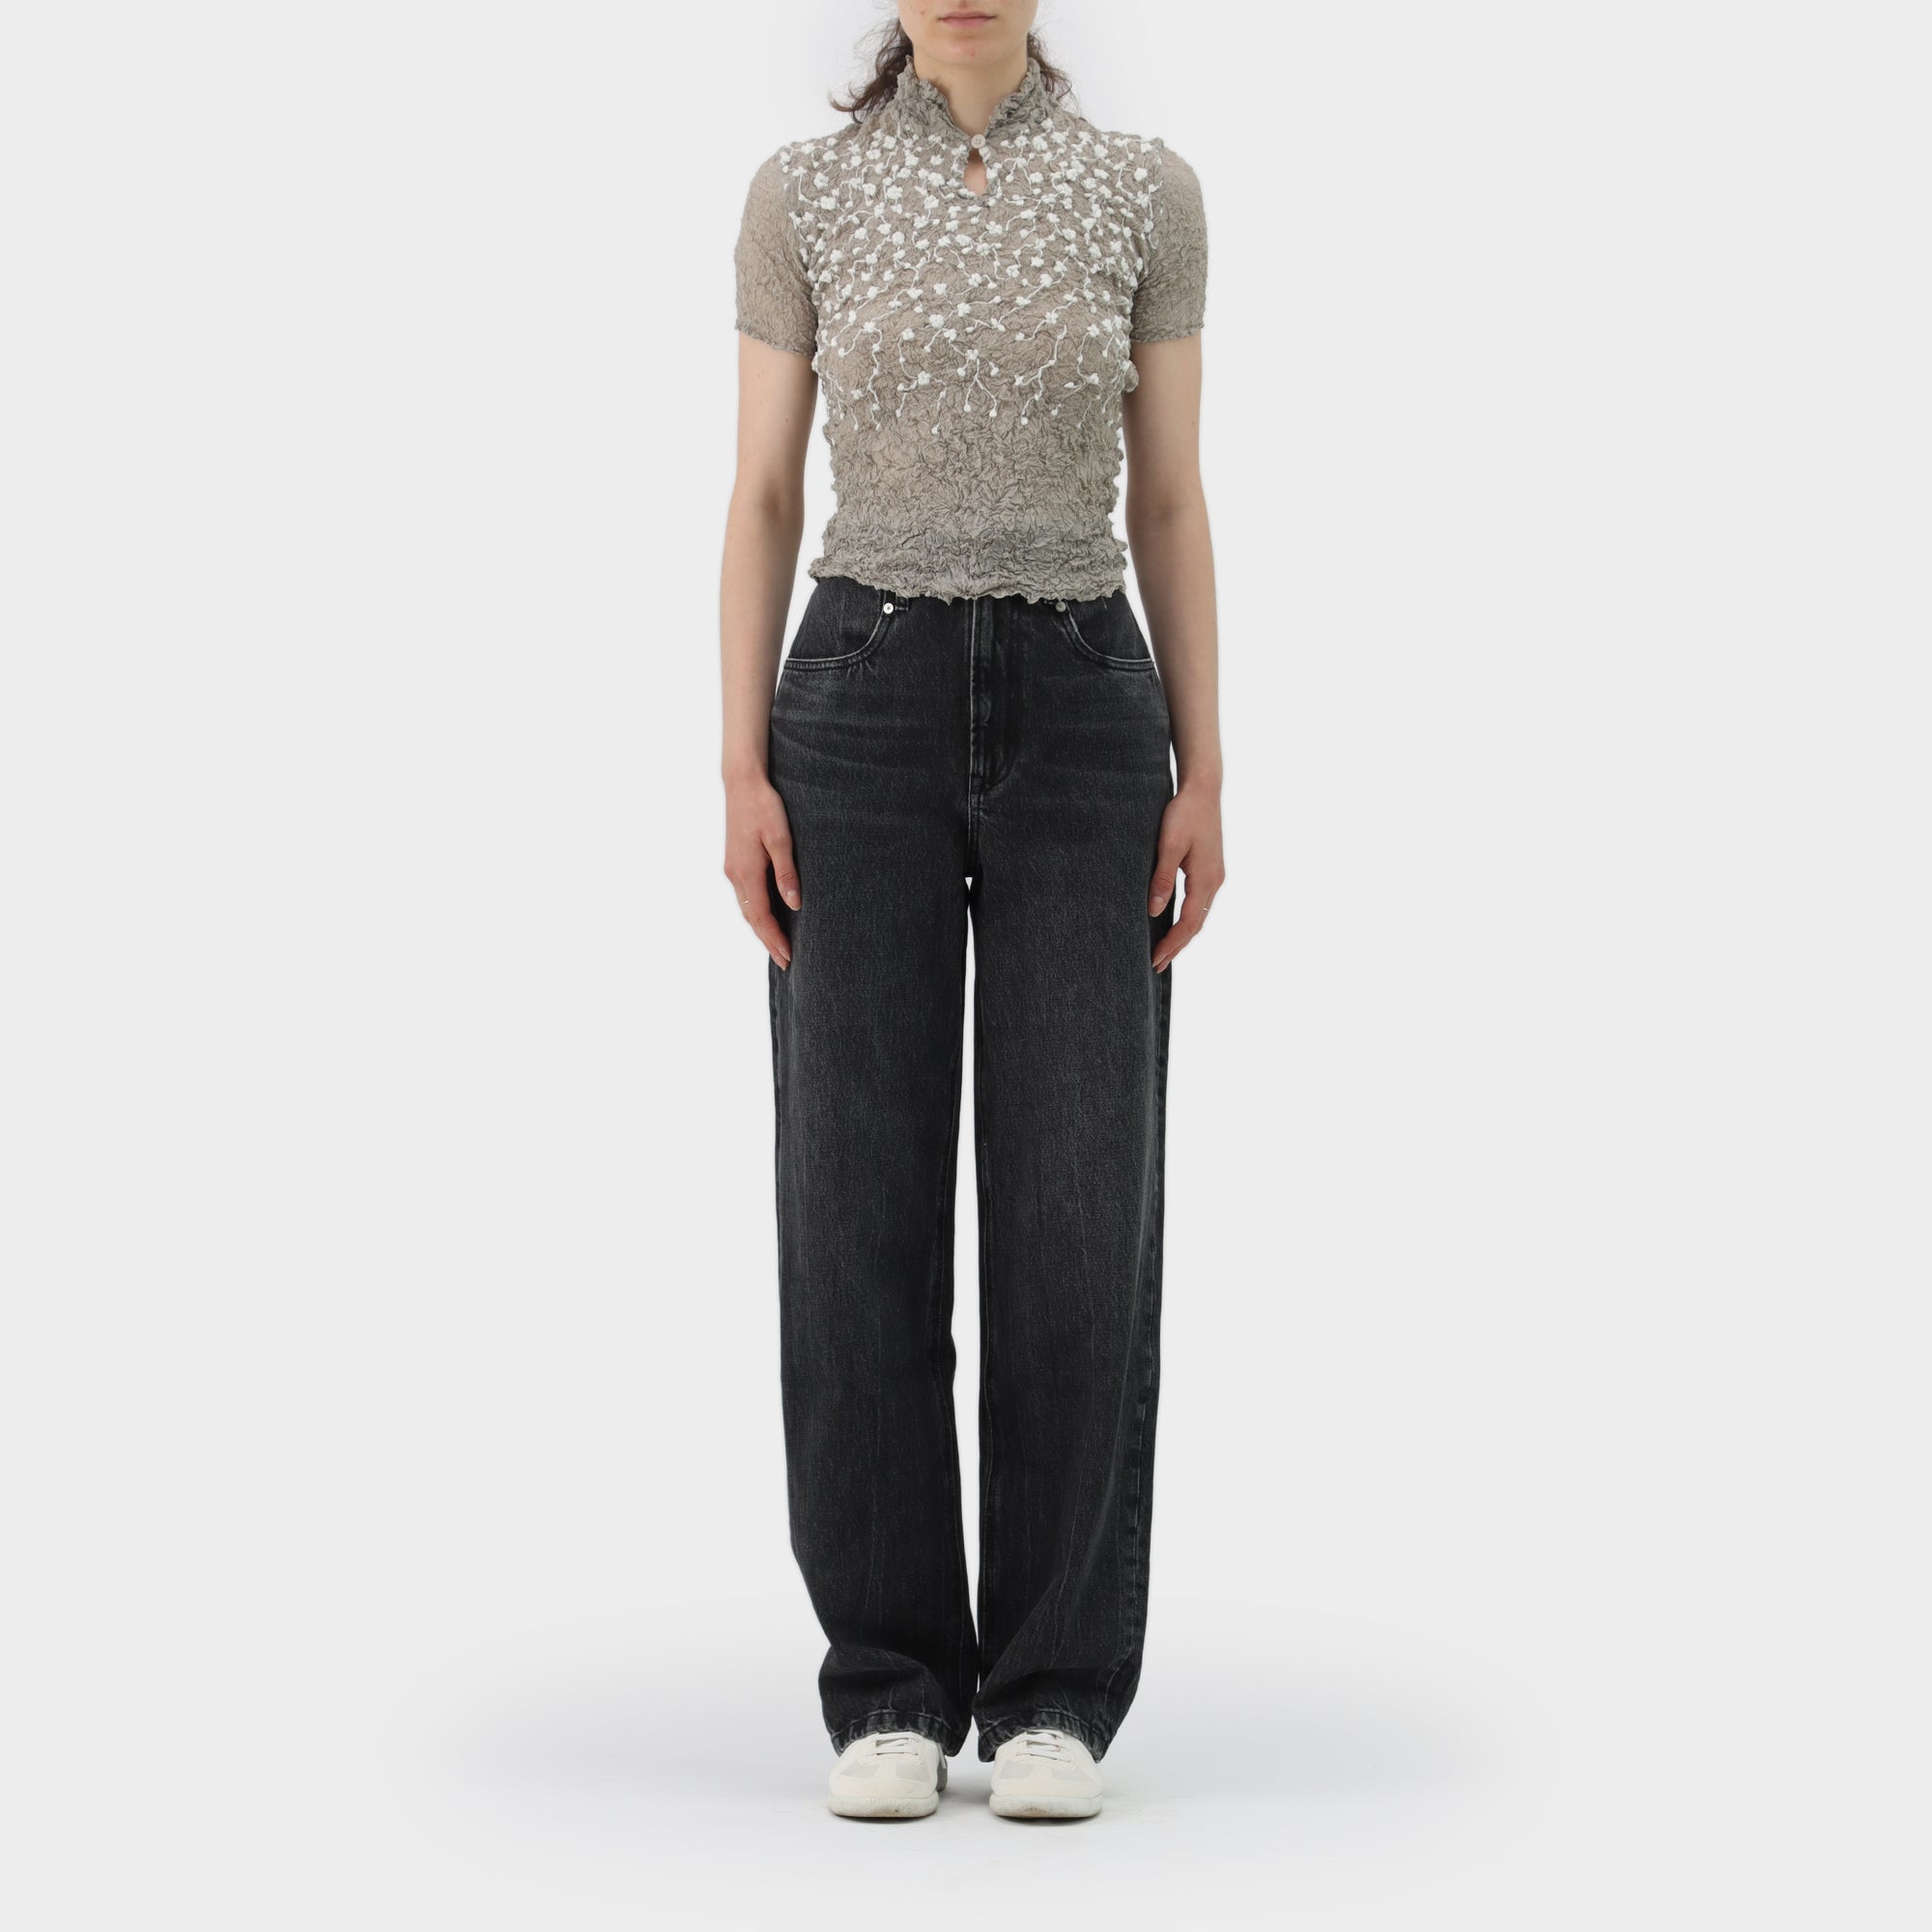 Issey Miyake White Label Floral Embroidered Scrunch Pleat Top